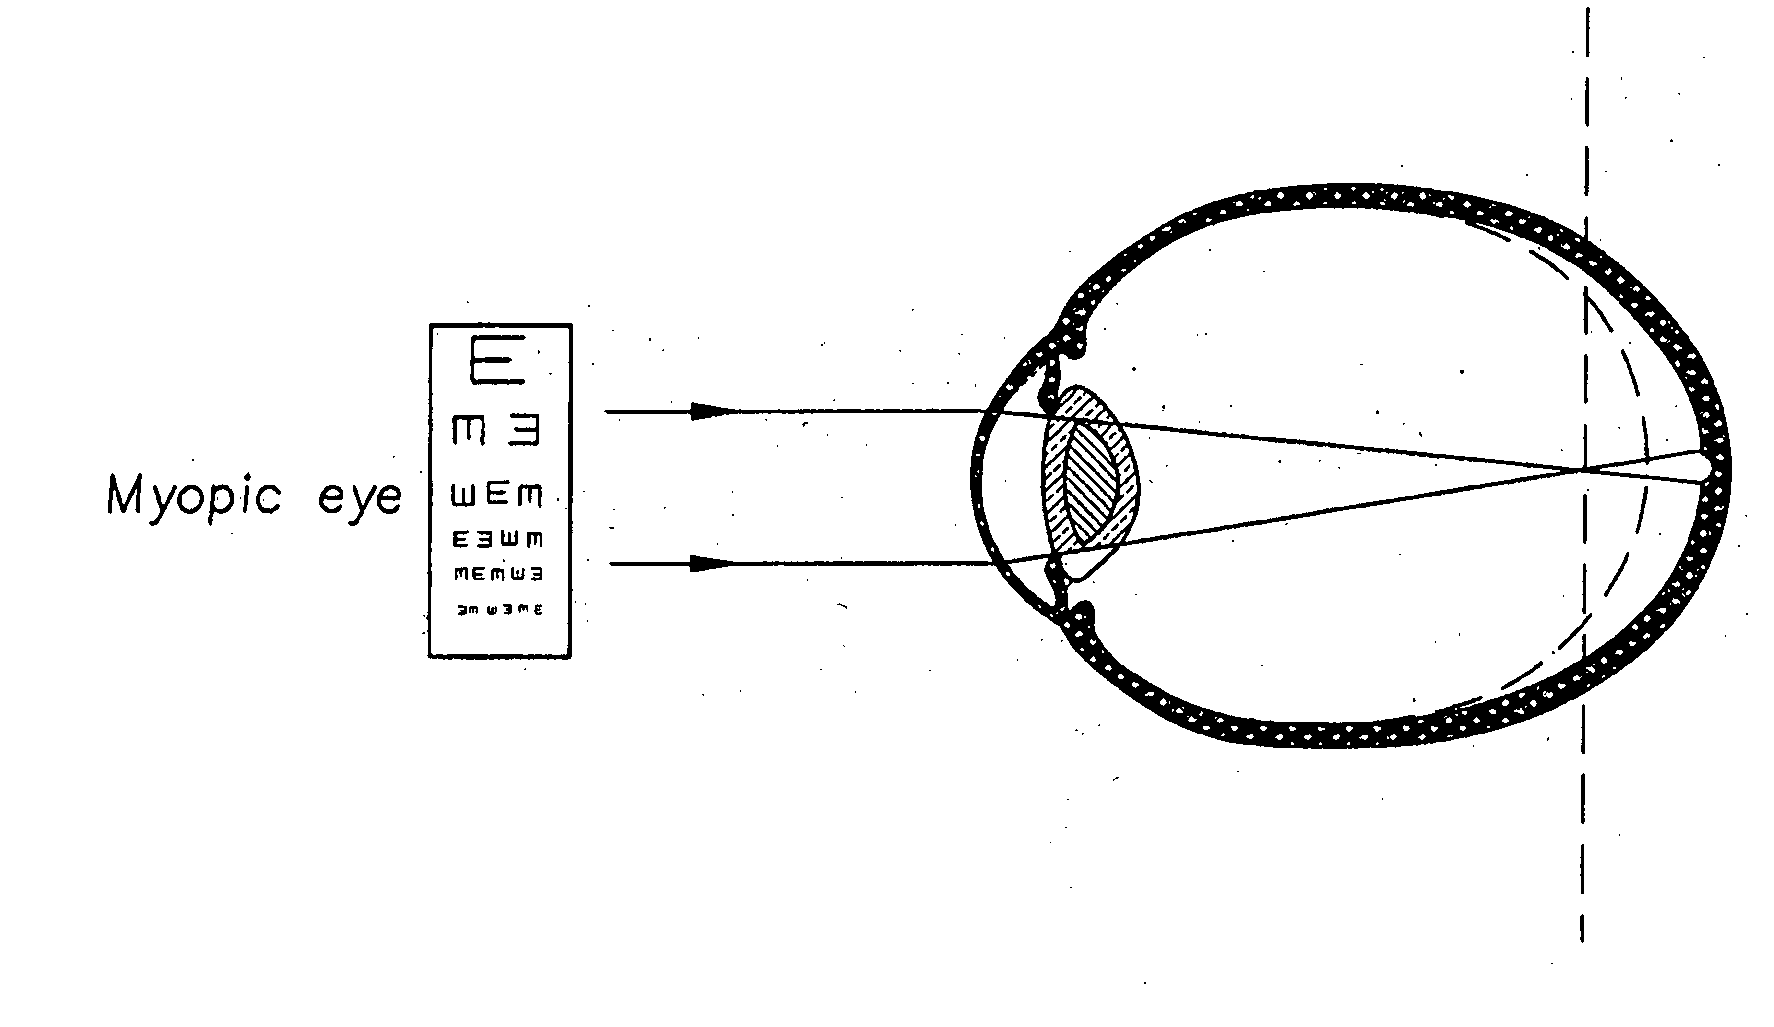 Contact lenses for myopic eyes and methods of treating myopia